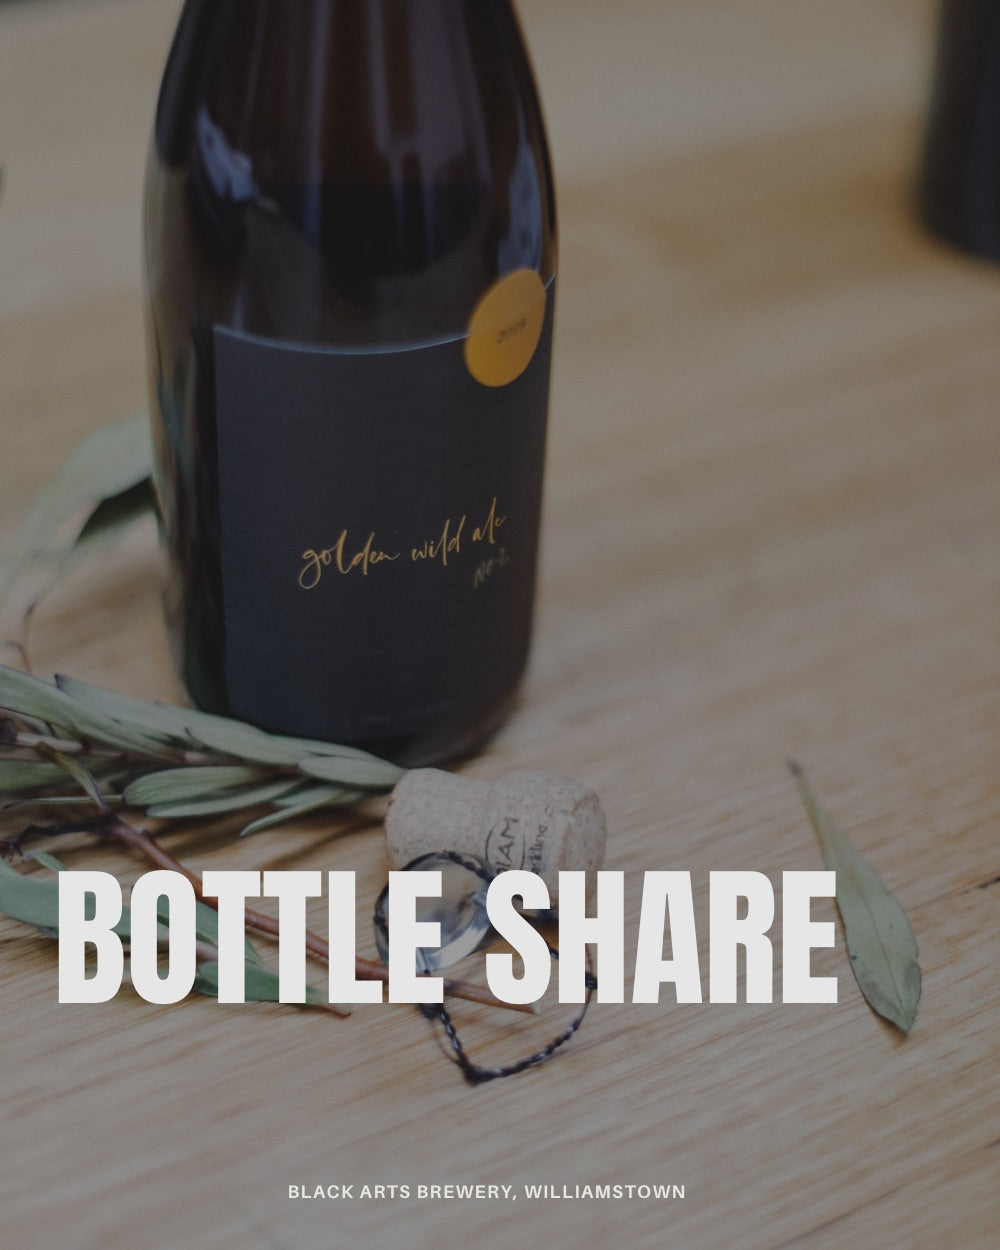 16th March Bottle Share